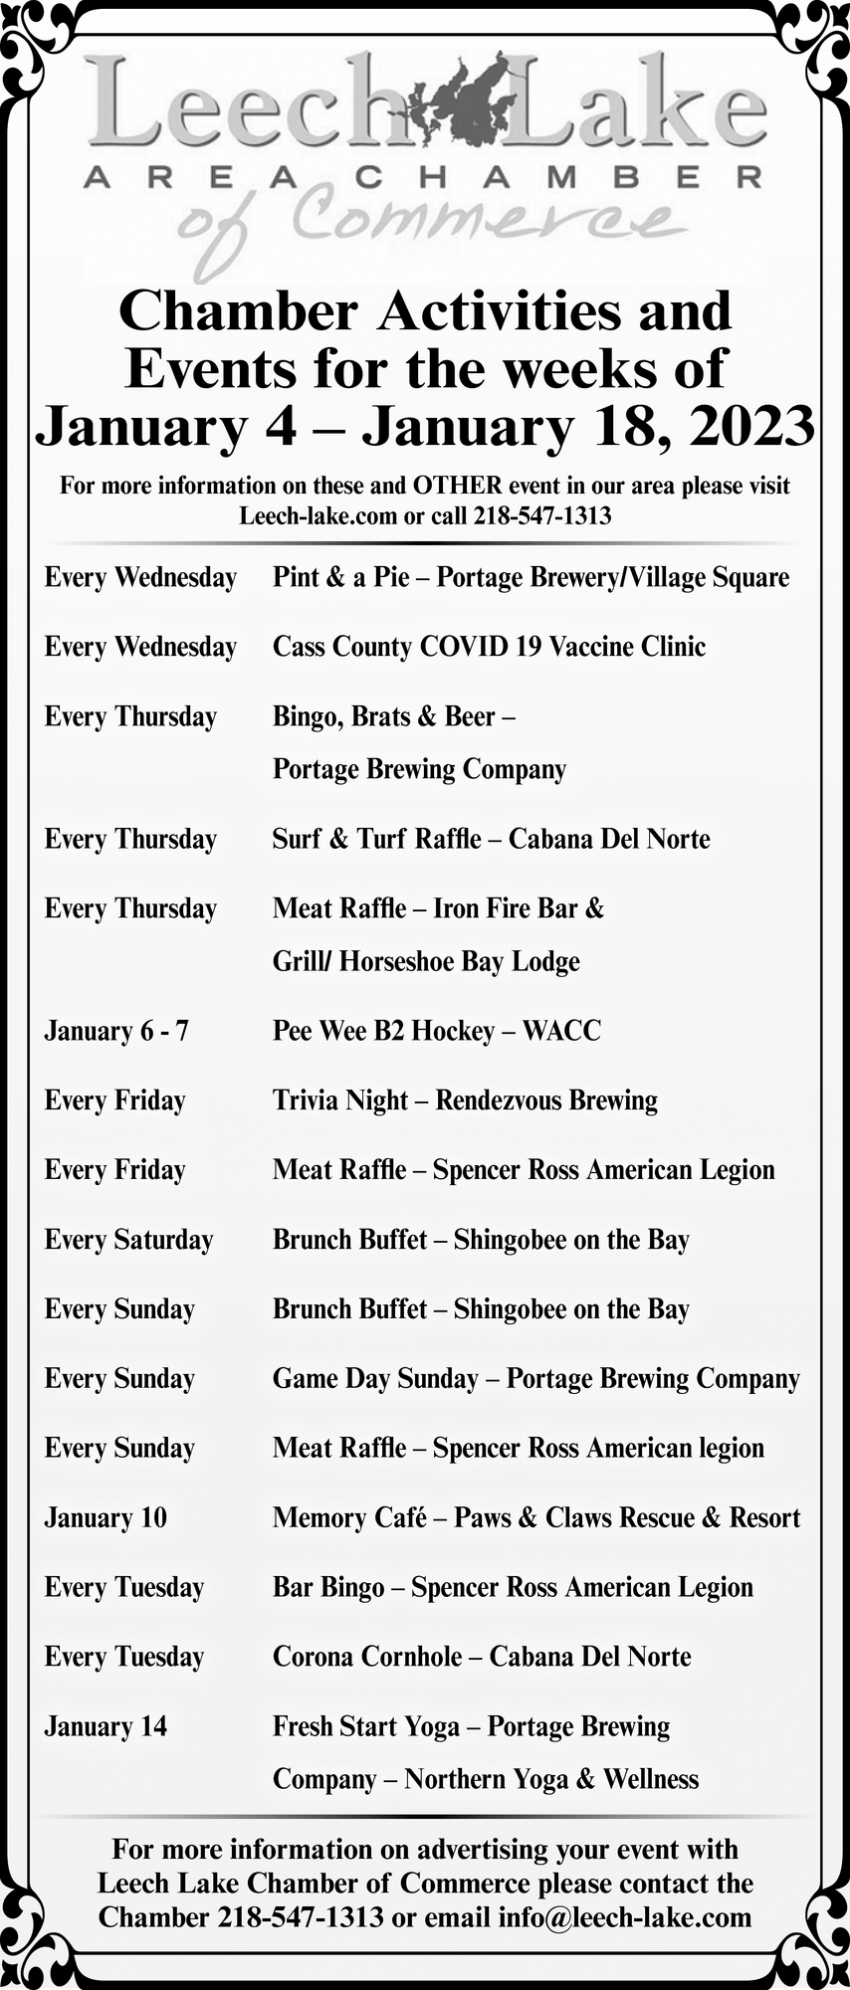 Chamber Activities and Events for the Weeks of January 4 - January 18, 2023